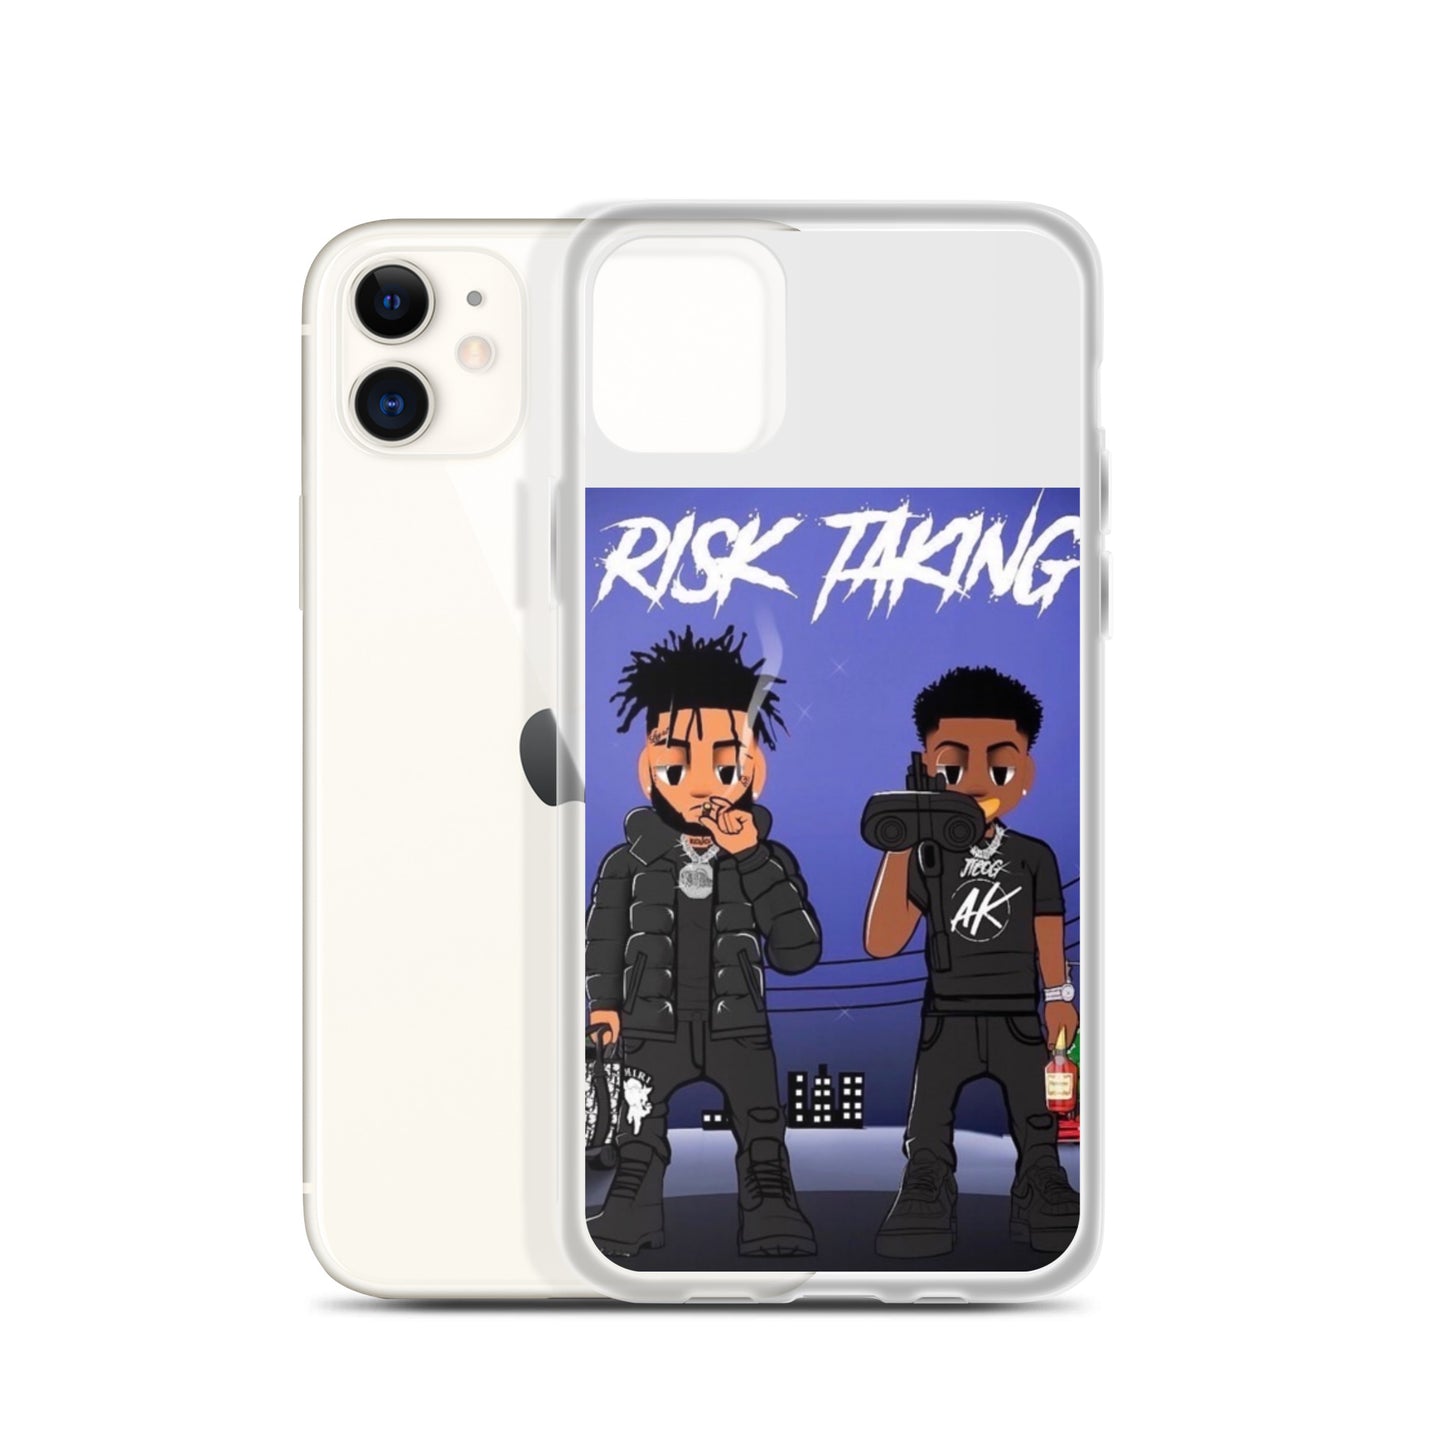 Risk Taking iPhone® Cas